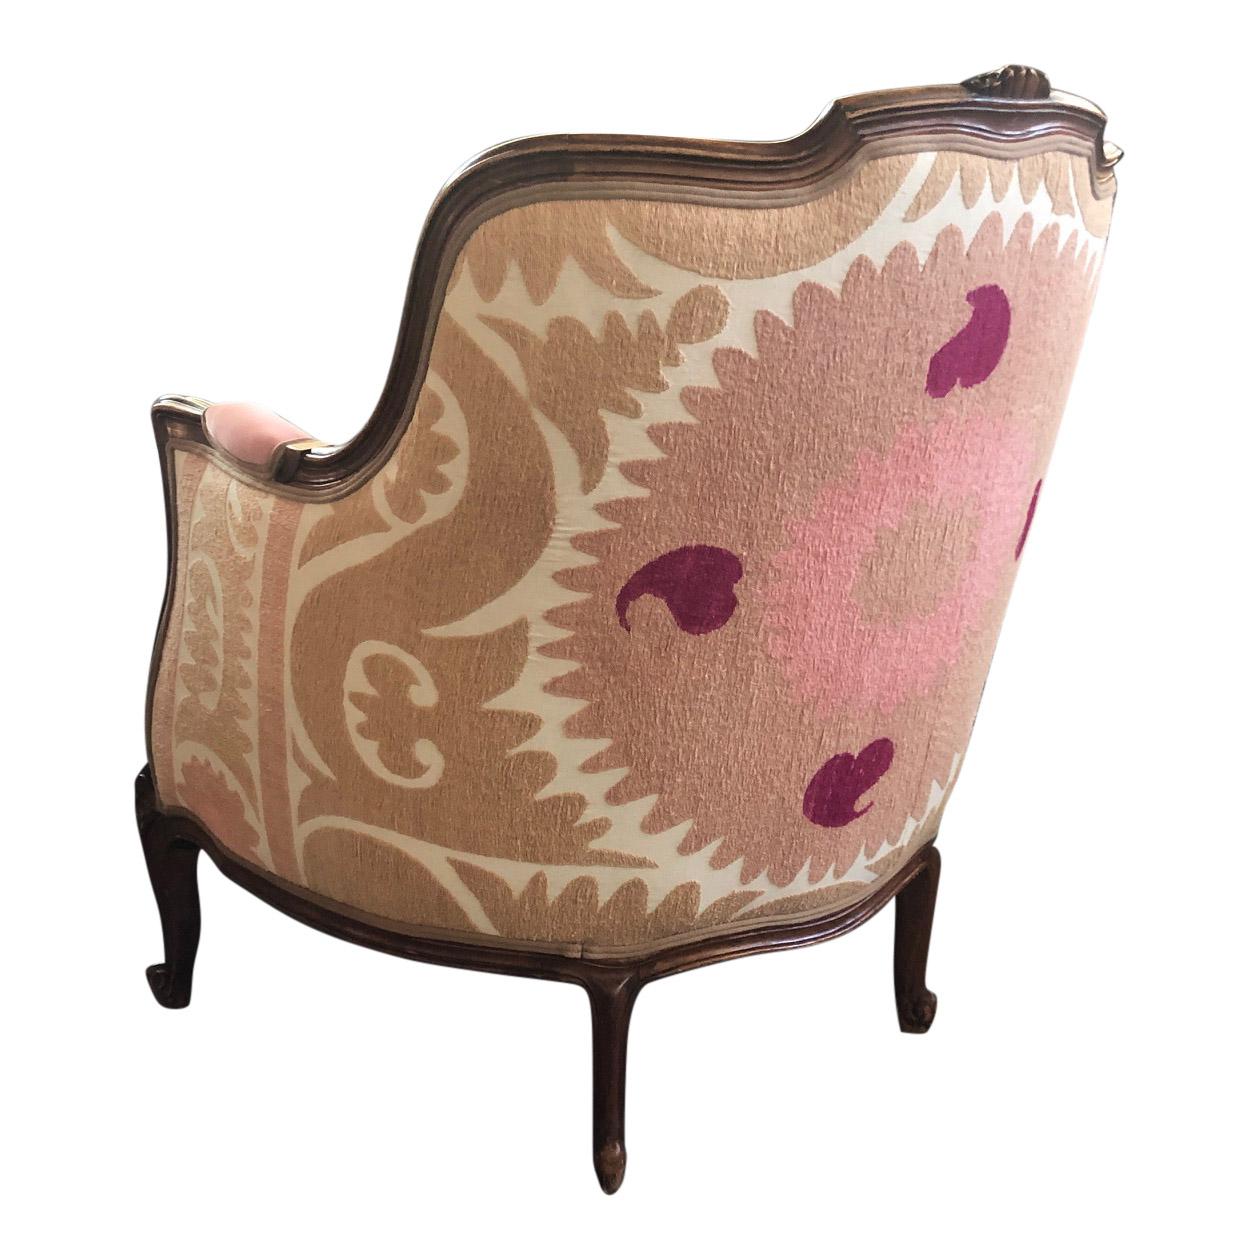 This is a so called Louis XV Bergère style chair from the 20th century. The chair is made from beech wood and has cabriole legs. The front has been upholstered with a new fabric from Designers Guild in a light pink peachy colour. The back of the